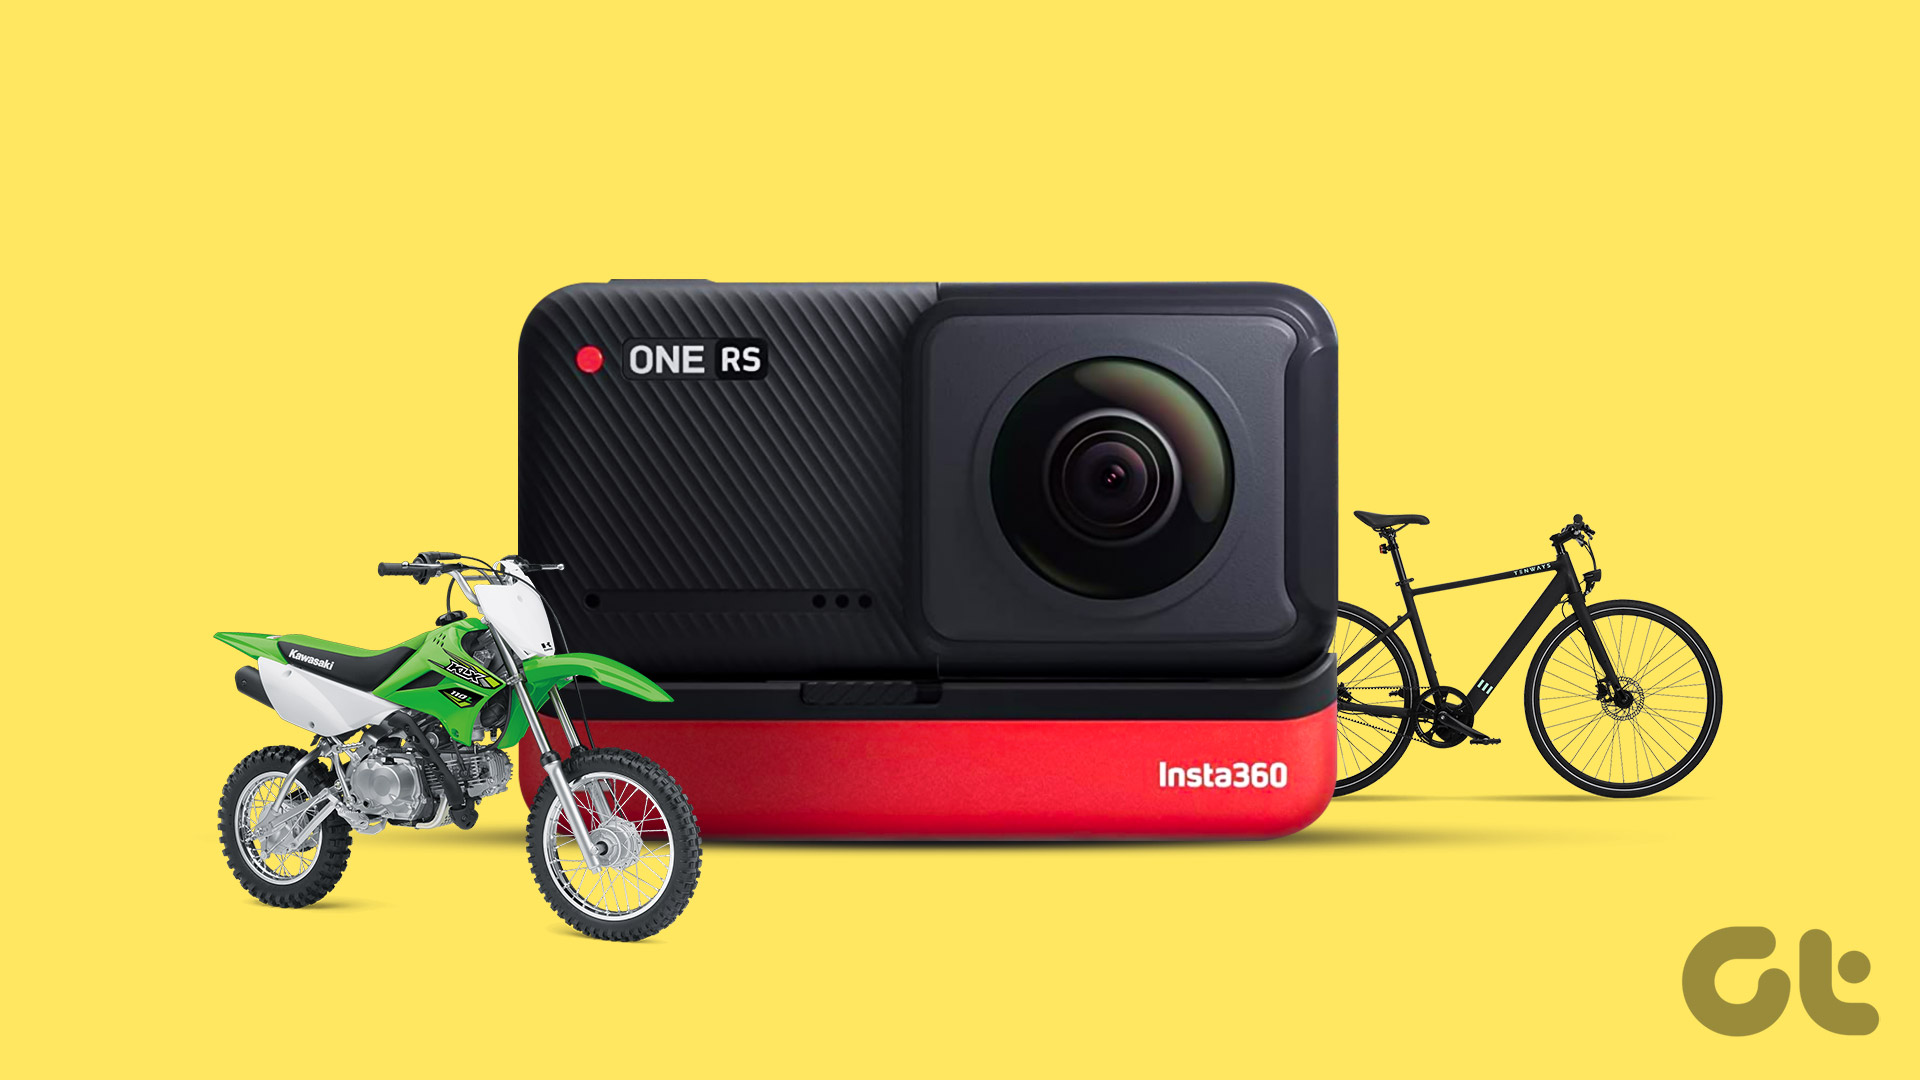 The best 360 cameras for motorcycles